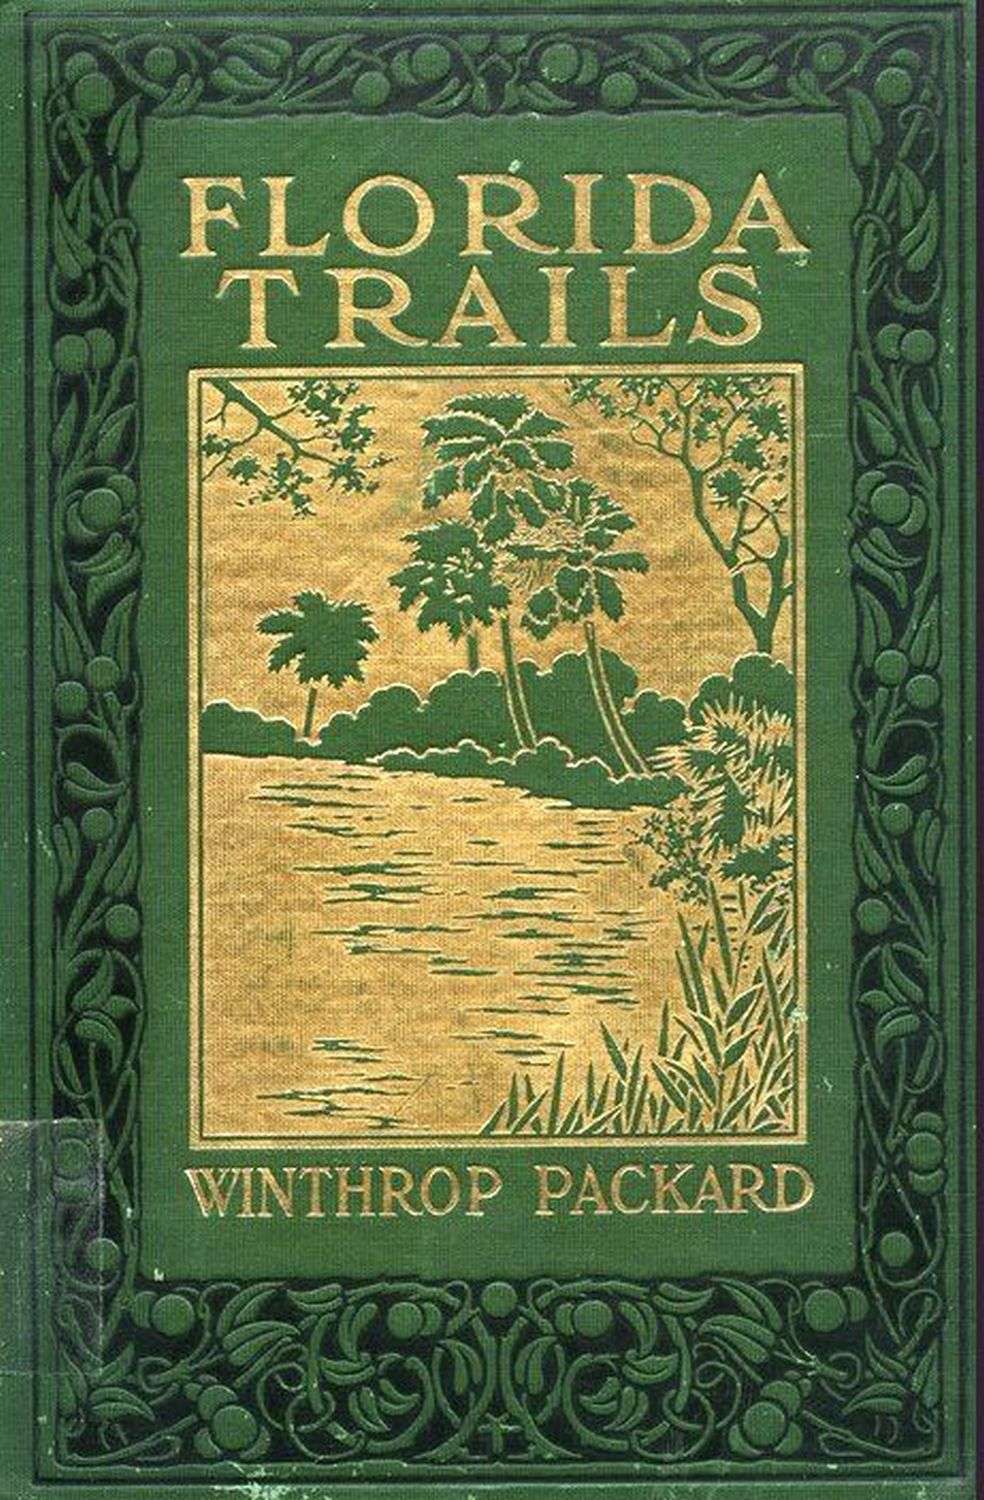 The Project Gutenberg eBook of Florida Trails, by Winthrop Packard. photo